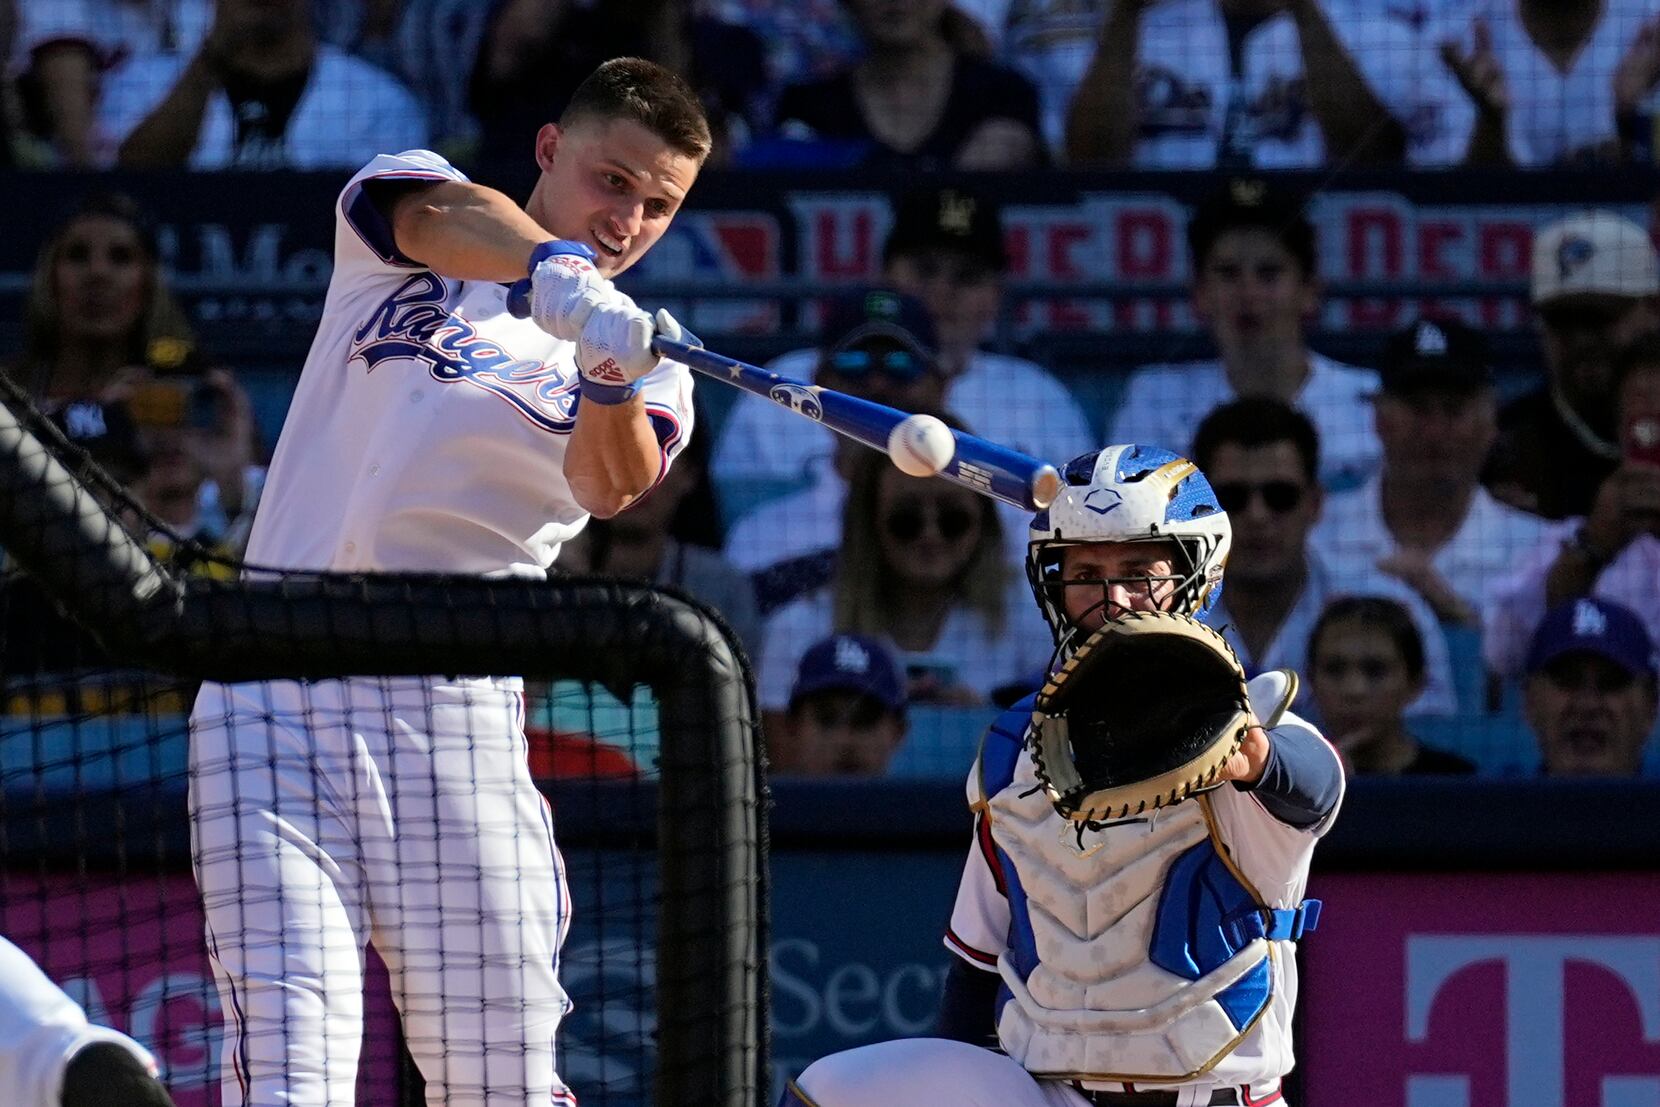 MLB Home Run Derby Winners and Losers: Champion, most home runs